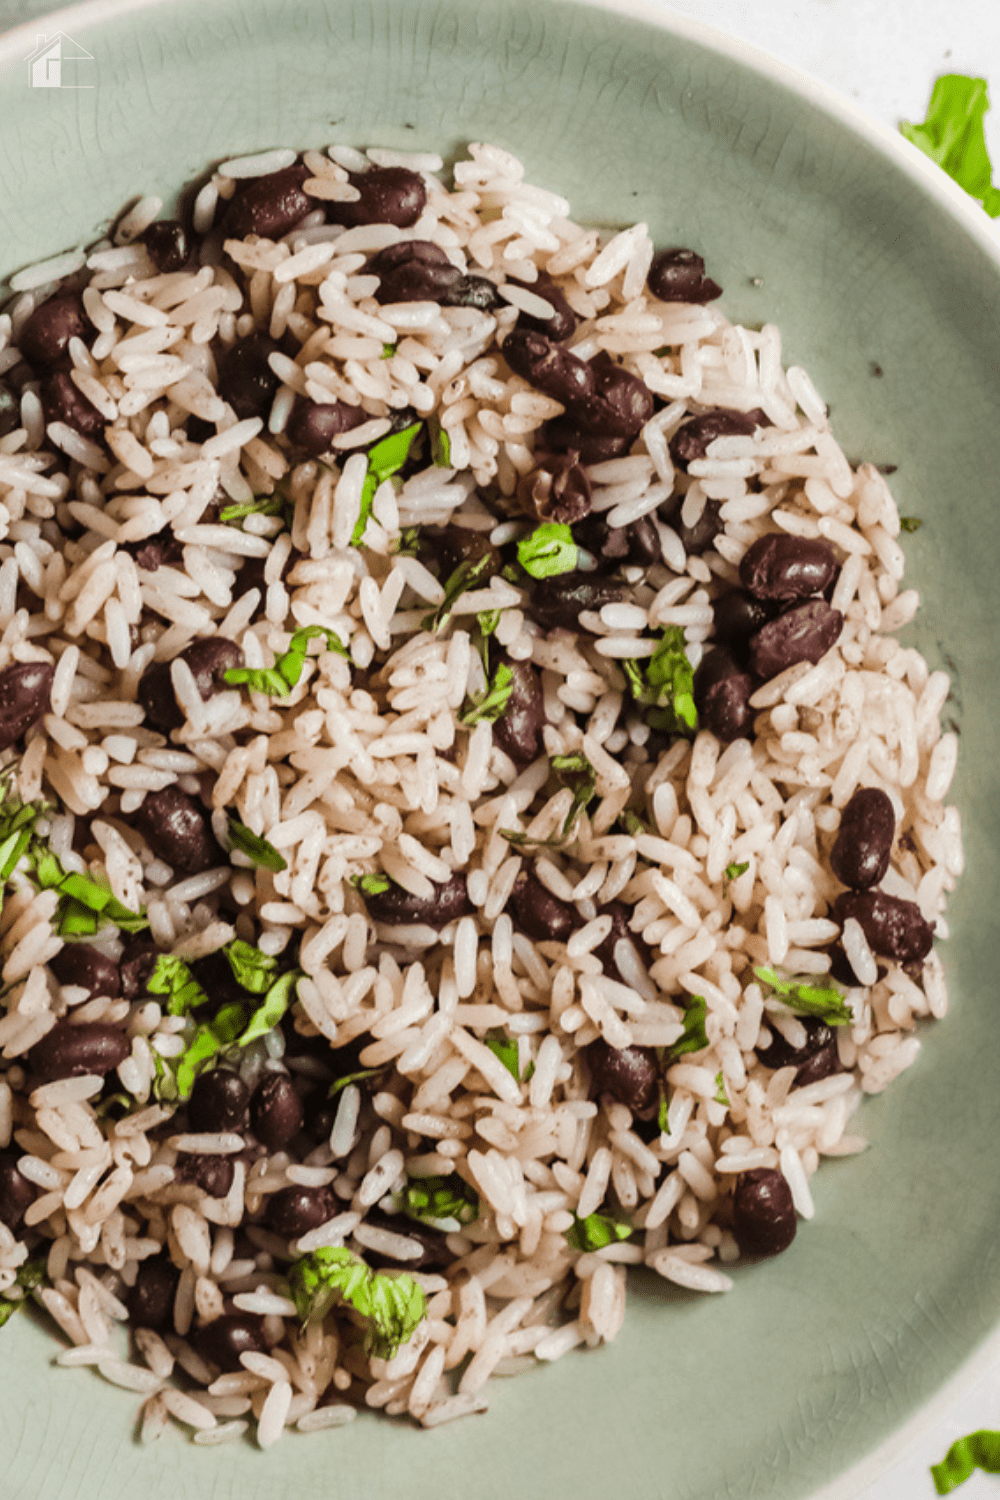 Gallo Pinto is a traditional Costa Rican and Nicaragua recipe made with cooked rice and beans. Easy to make and freezer-friendly recipe. #recipe #latinrecipe #easyrecipe #ricerecipe via @mystayathome